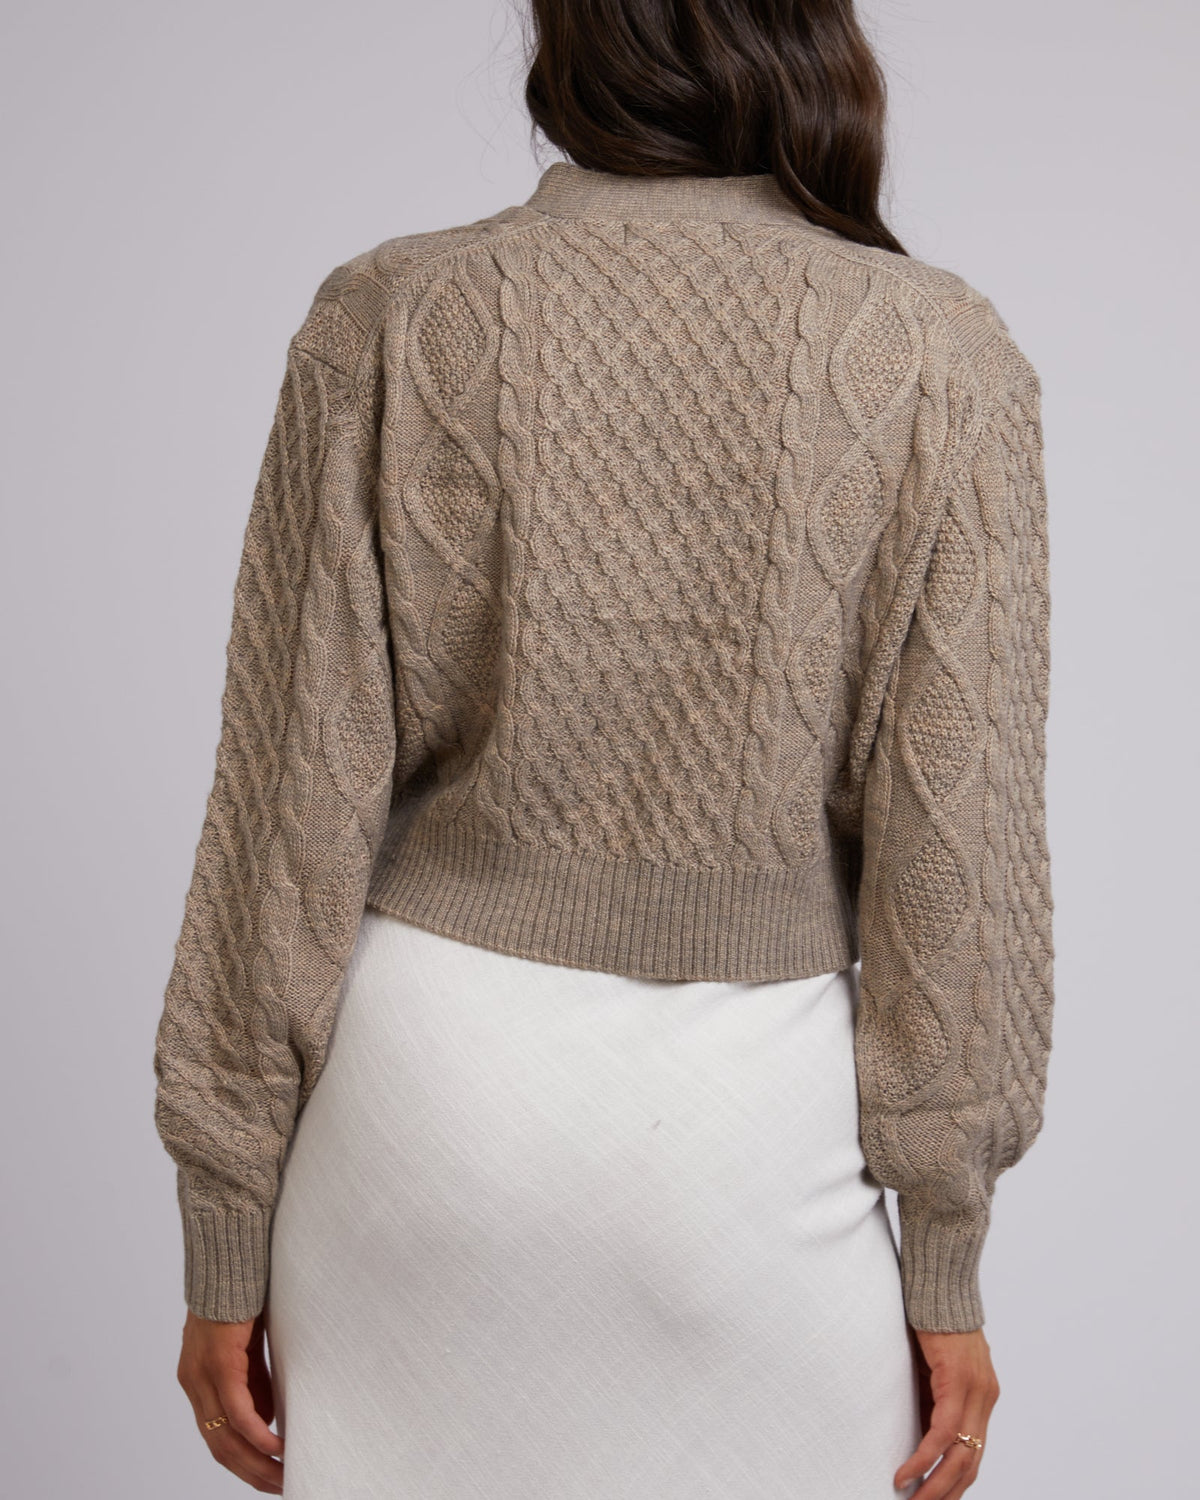 All About Eve-Zepher Knit Cardi Oatmeal-Edge Clothing